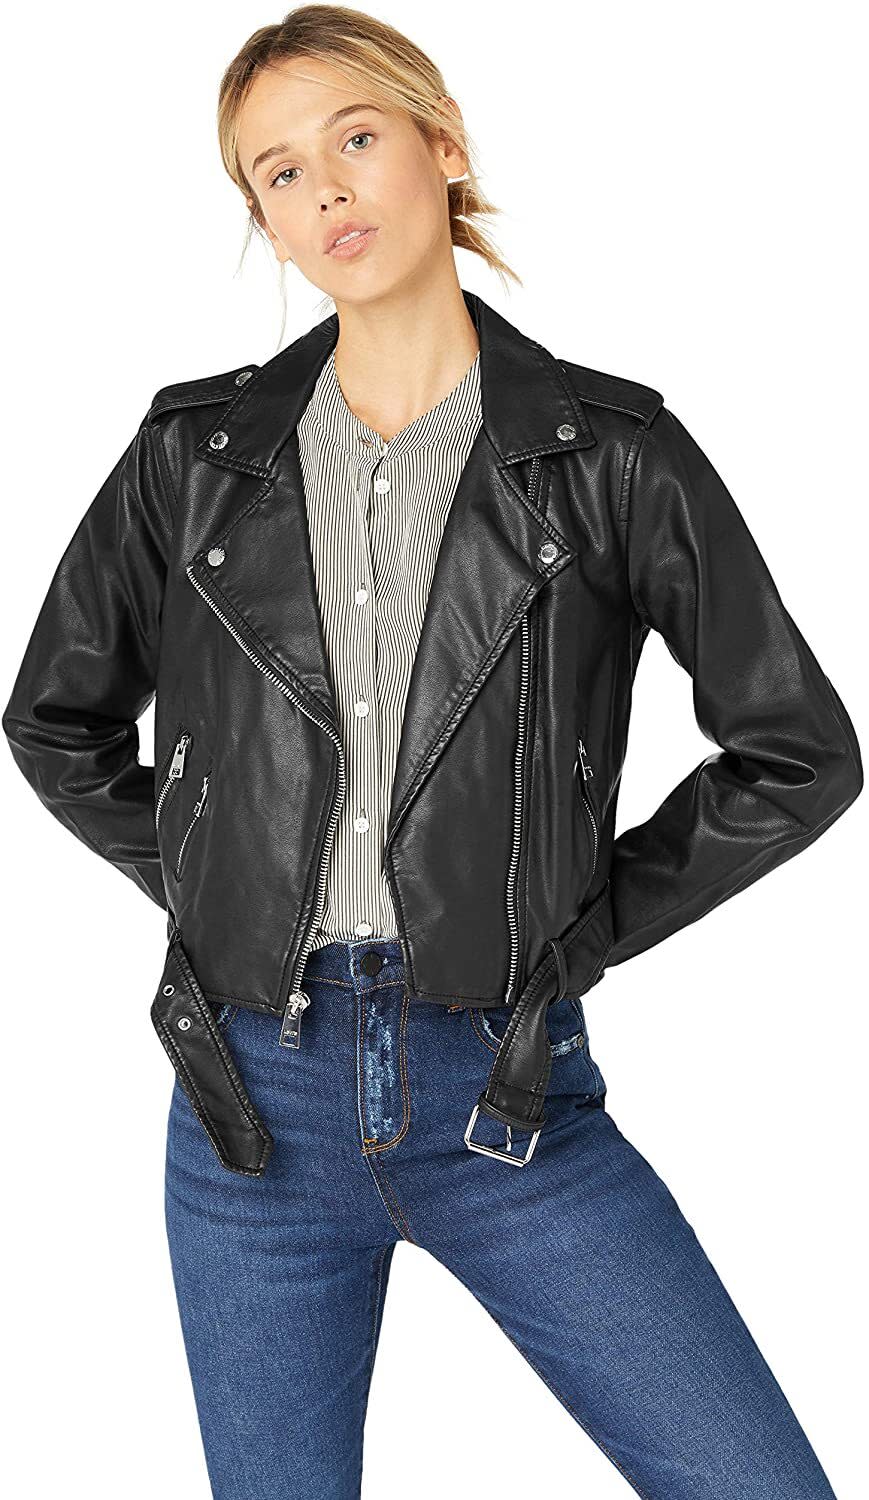 Throw this on over any outfit to look instantly cooler.<br /><br /><strong>Promising review:</strong> "I absolutely love this jacket!!! I've had several faux leather jackets that fit me okay, but this one fit me PERFECTLY, and it's well made. I think I'm going to order another one just to have it." &mdash; <a href="https://amzn.to/3e1K8sI" target="_blank" rel="nofollow noopener noreferrer" data-skimlinks-tracking="5753950" data-vars-affiliate="Amazon" data-vars-href="https://www.amazon.com/gp/customer-reviews/RO495SAVG13JI?tag=bfabby-20&amp;ascsubtag=5753950%2C1%2C30%2Cmobile_web%2C0%2C0%2C0" data-vars-keywords="cleaning,fast fashion" data-vars-link-id="0" data-vars-price="" data-vars-retailers="Amazon,Levi">Denise</a><br /><br /><strong>Get it from Amazon for <a href="https://amzn.to/3x504DA" target="_blank" rel="nofollow noopener noreferrer" data-skimlinks-tracking="5753950" data-vars-affiliate="Amazon" data-vars-asin="B07FDL5WJN" data-vars-href="https://www.amazon.com/dp/B07FDL5WJN?tag=bfabby-20&amp;ascsubtag=5753950%2C1%2C30%2Cmobile_web%2C0%2C0%2C15973668" data-vars-keywords="cleaning,fast fashion" data-vars-link-id="15973668" data-vars-price="" data-vars-product-id="18042258" data-vars-product-img="https://m.media-amazon.com/images/I/31n-xUC9QRL.jpg" data-vars-product-title="Levi's Women's Faux Leather Belted Motorcycle Jacket (Standard and Plus Sizes), plum, X-Small" data-vars-retailers="Amazon,Levi">$120</a> (available in sizes XS-4X and in 31 colors).</strong>